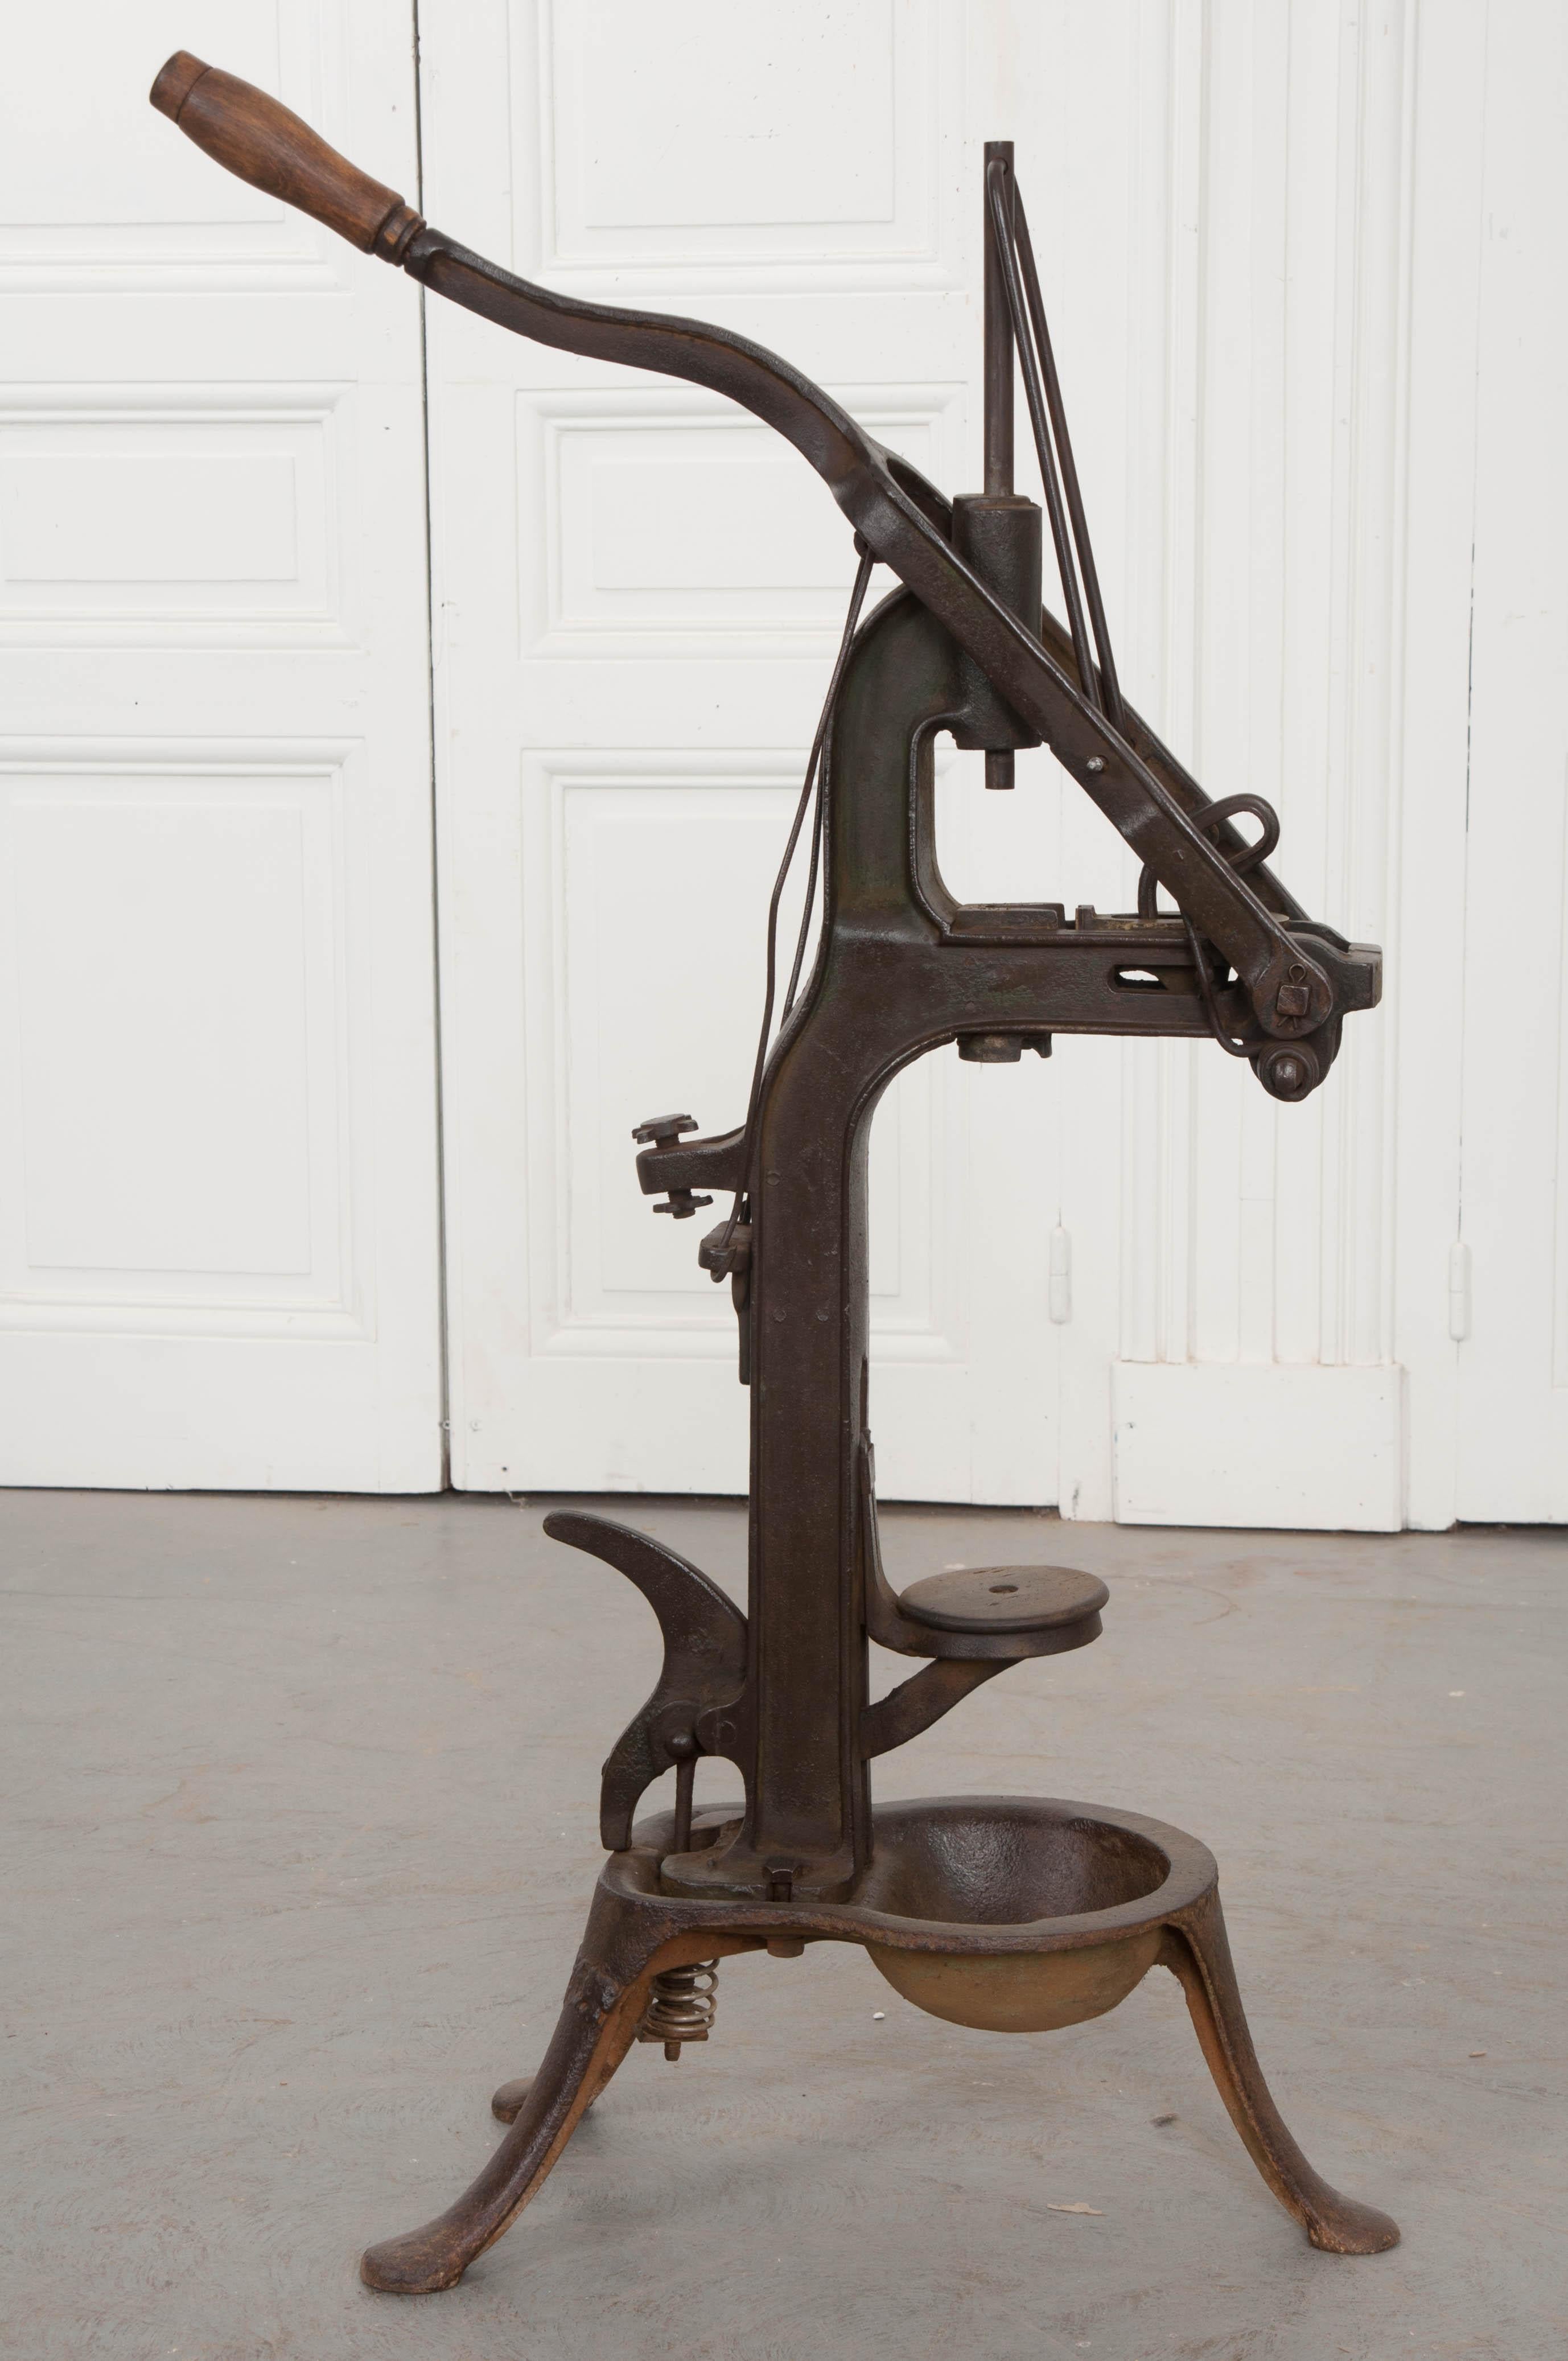 This unique apparatus has a lot to do with the history and shaping of French history and culture: the wine bottle corker. This wine corker, made, circa 1870, was used in a winery in France. Wine production is intrinsic to French culture and is taken